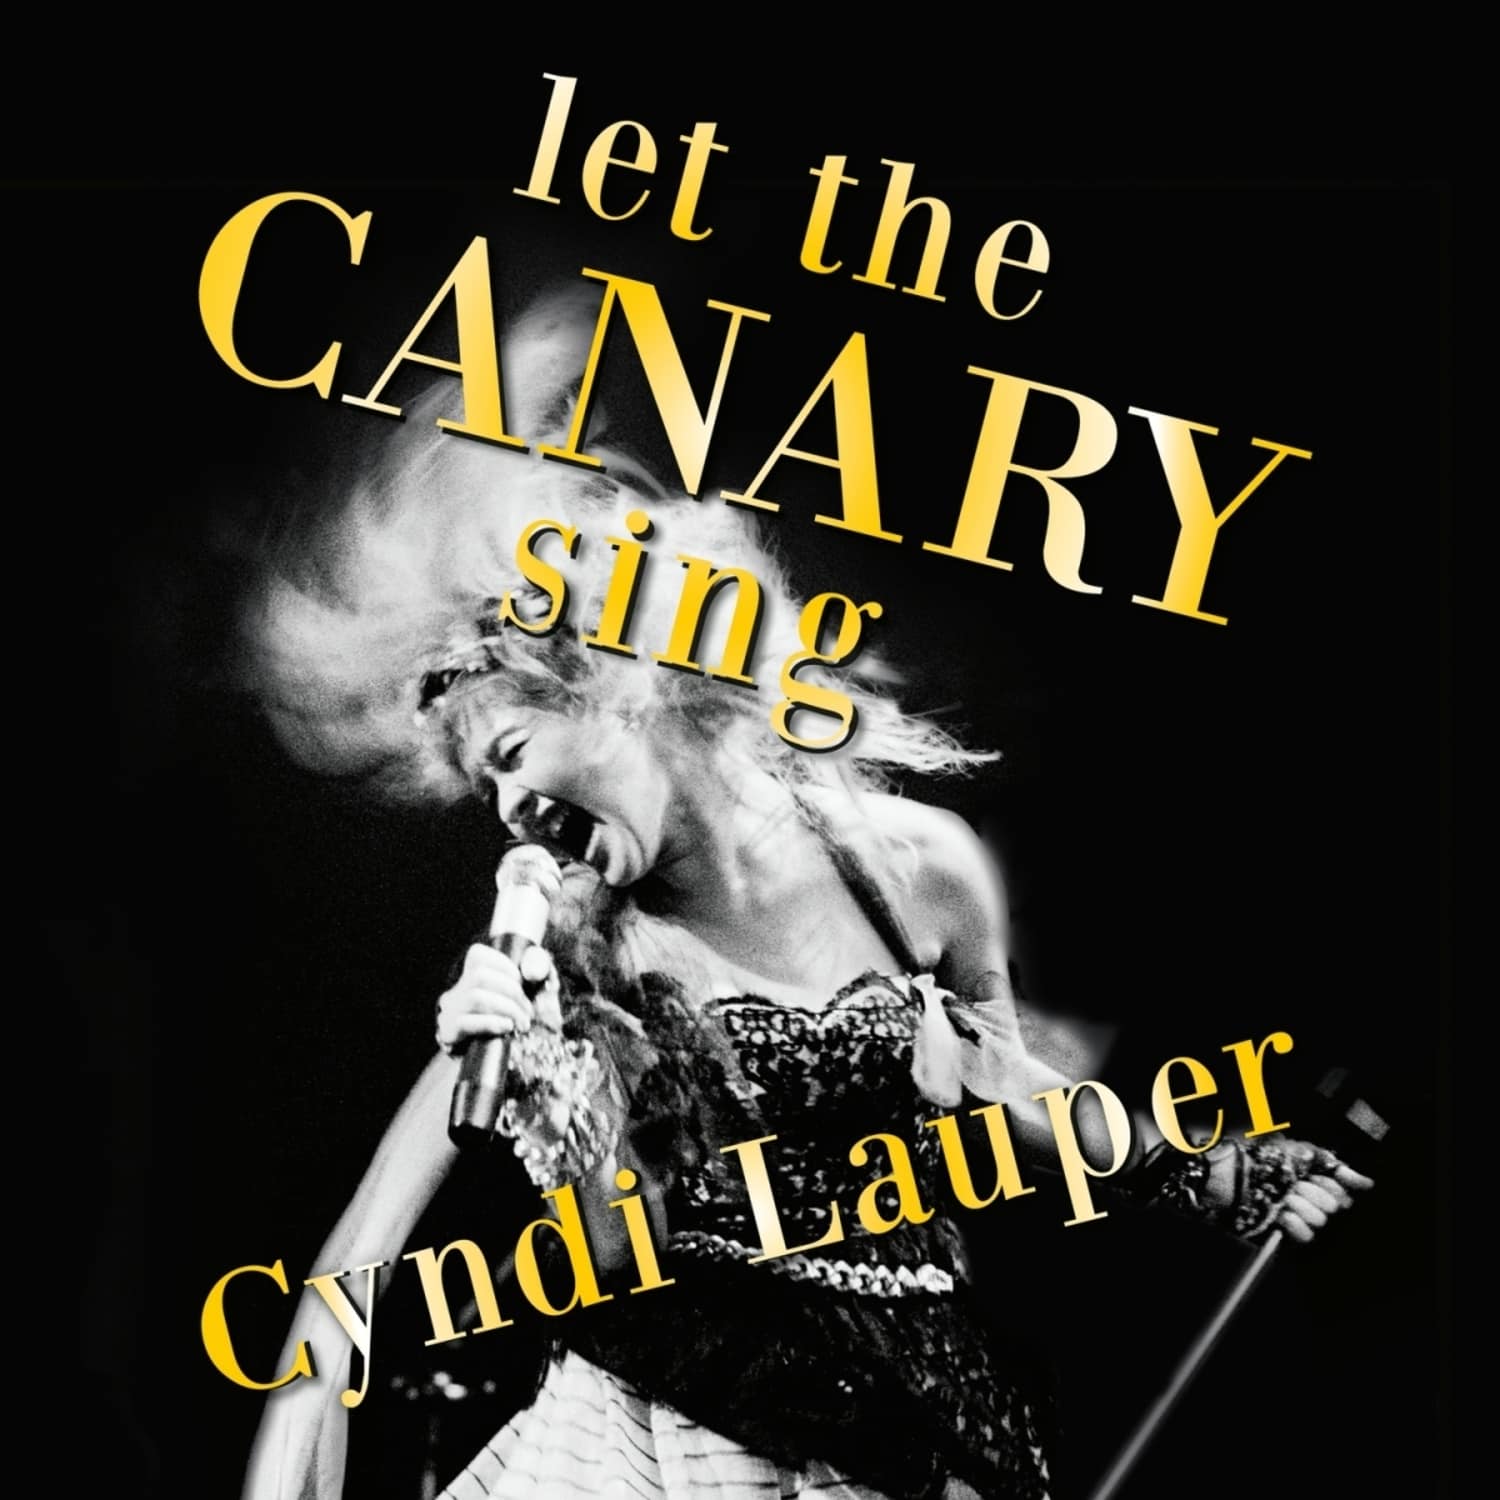 Cyndi Lauper - LET THE CANARY SING 